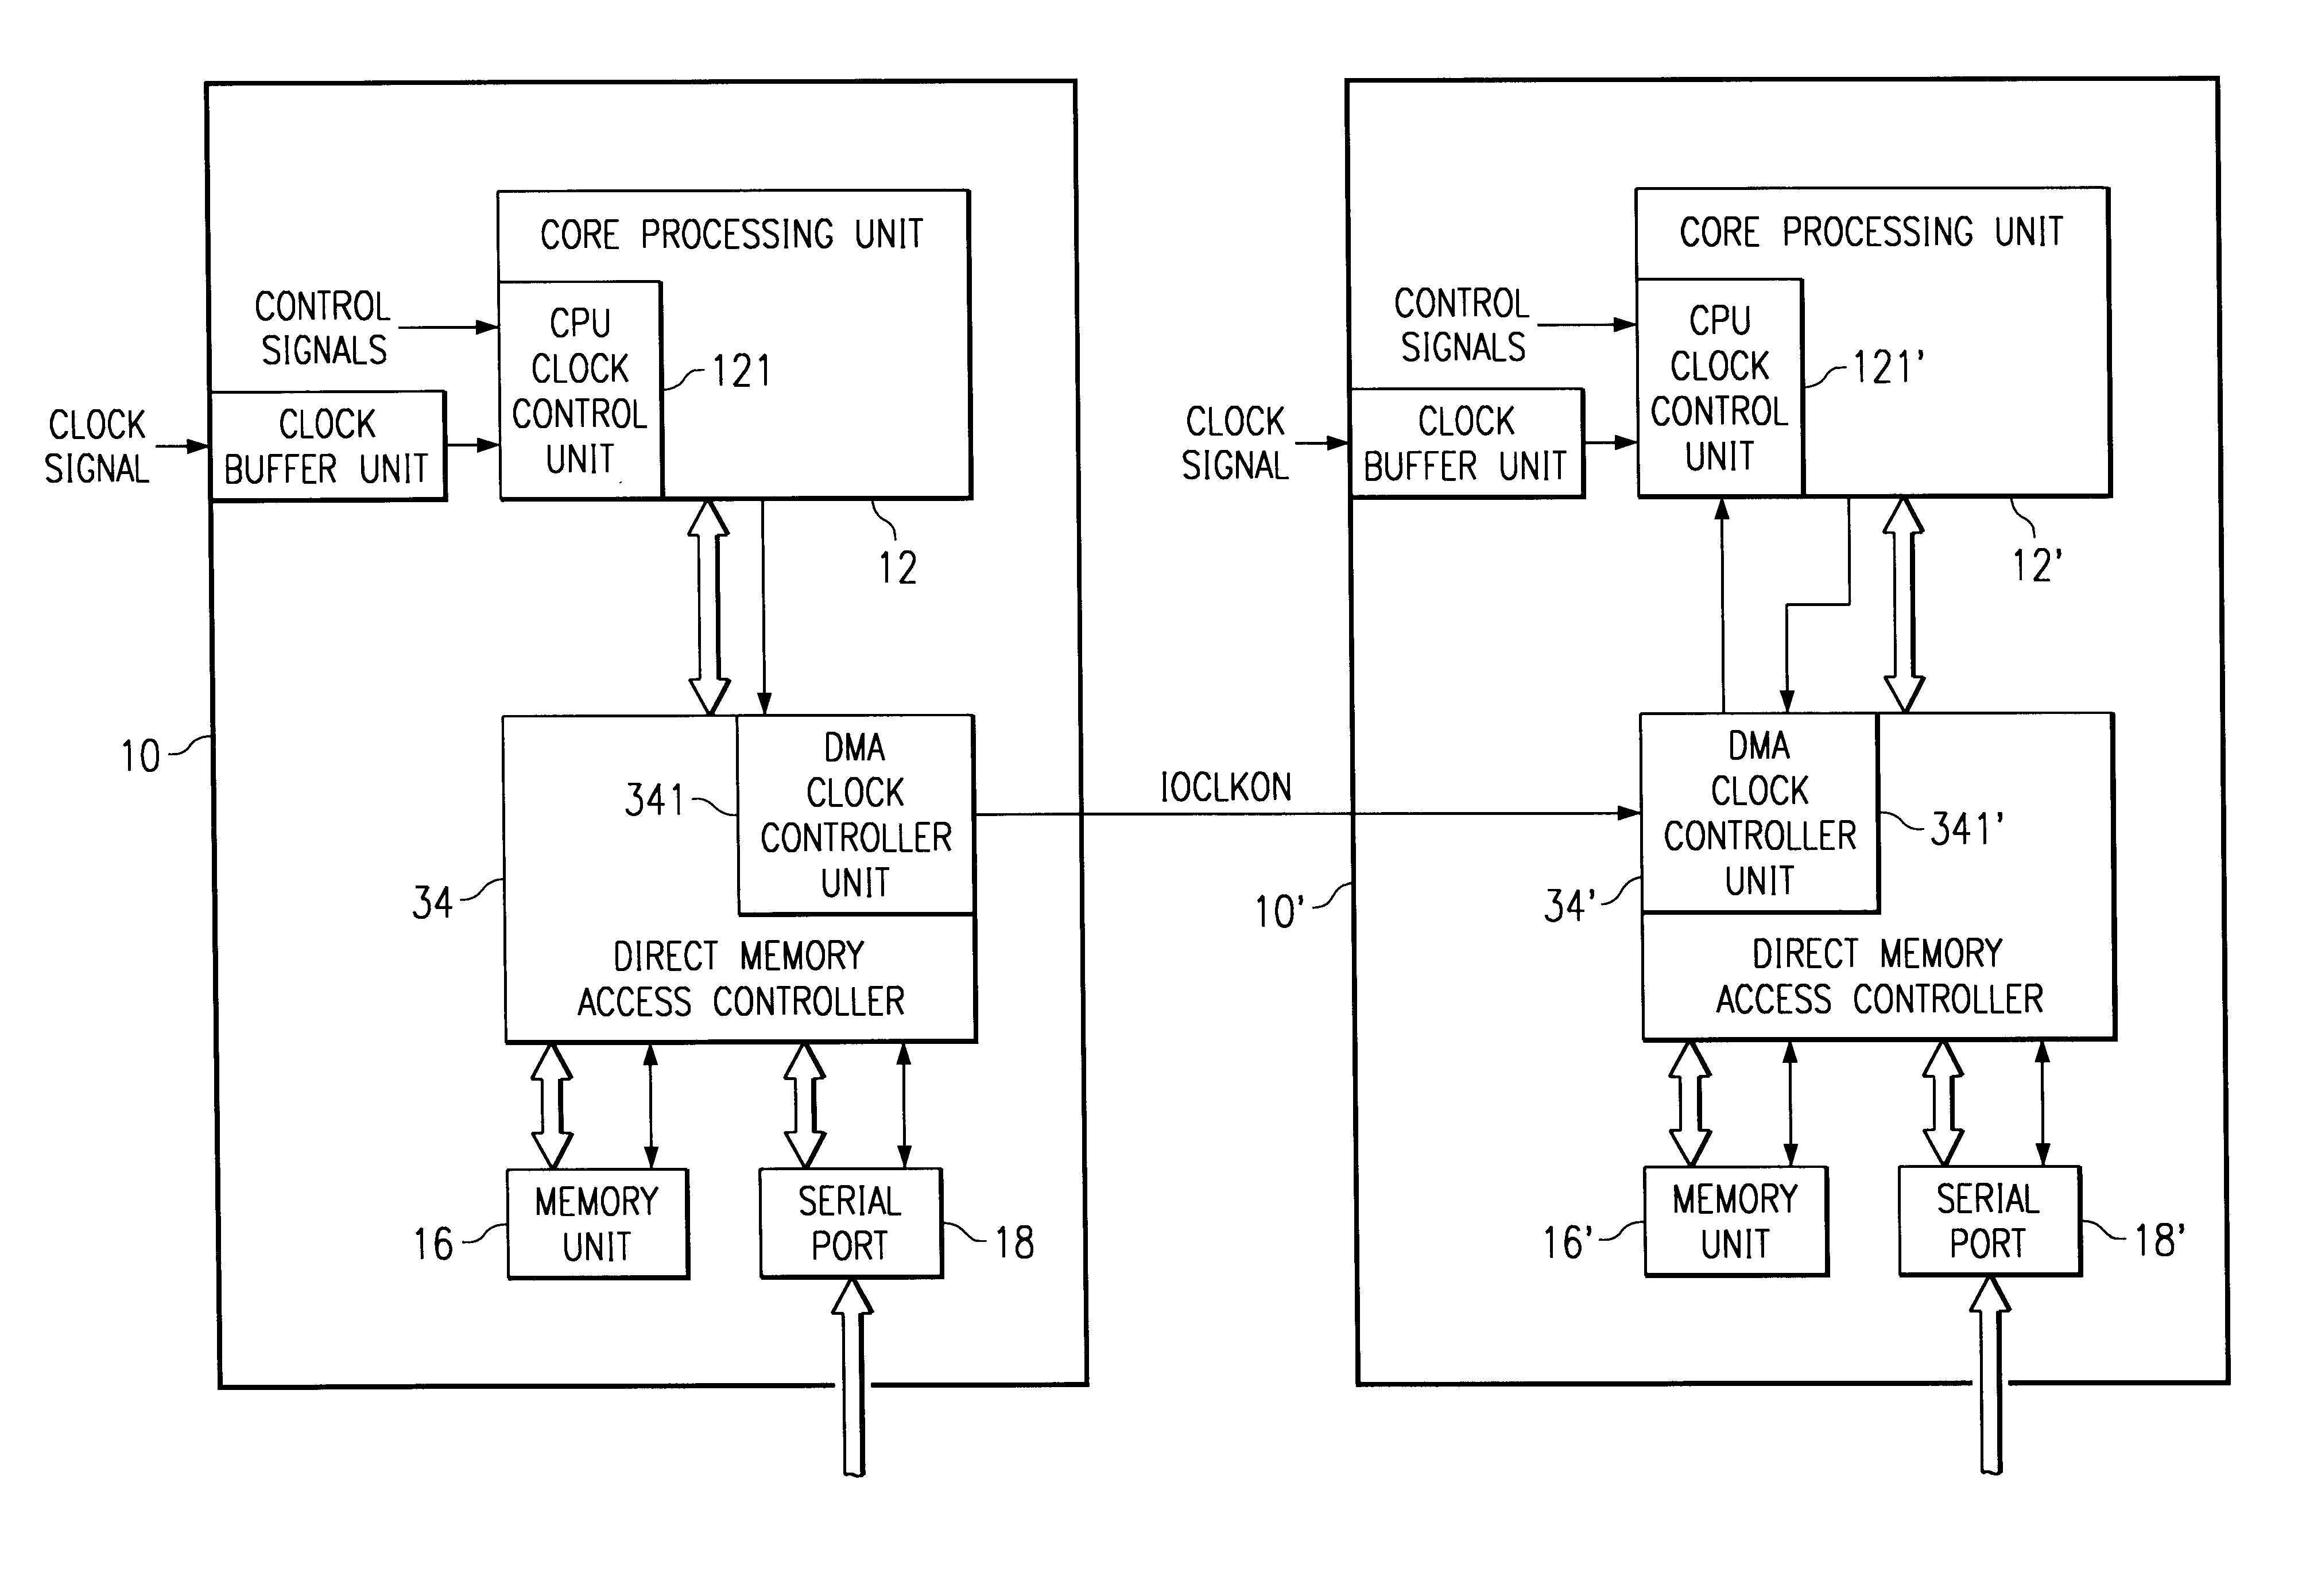 Apparatus and method for activation of a digital signal processor in an idle mode for interprocessor transfer of signal groups in a digital signal processing unit